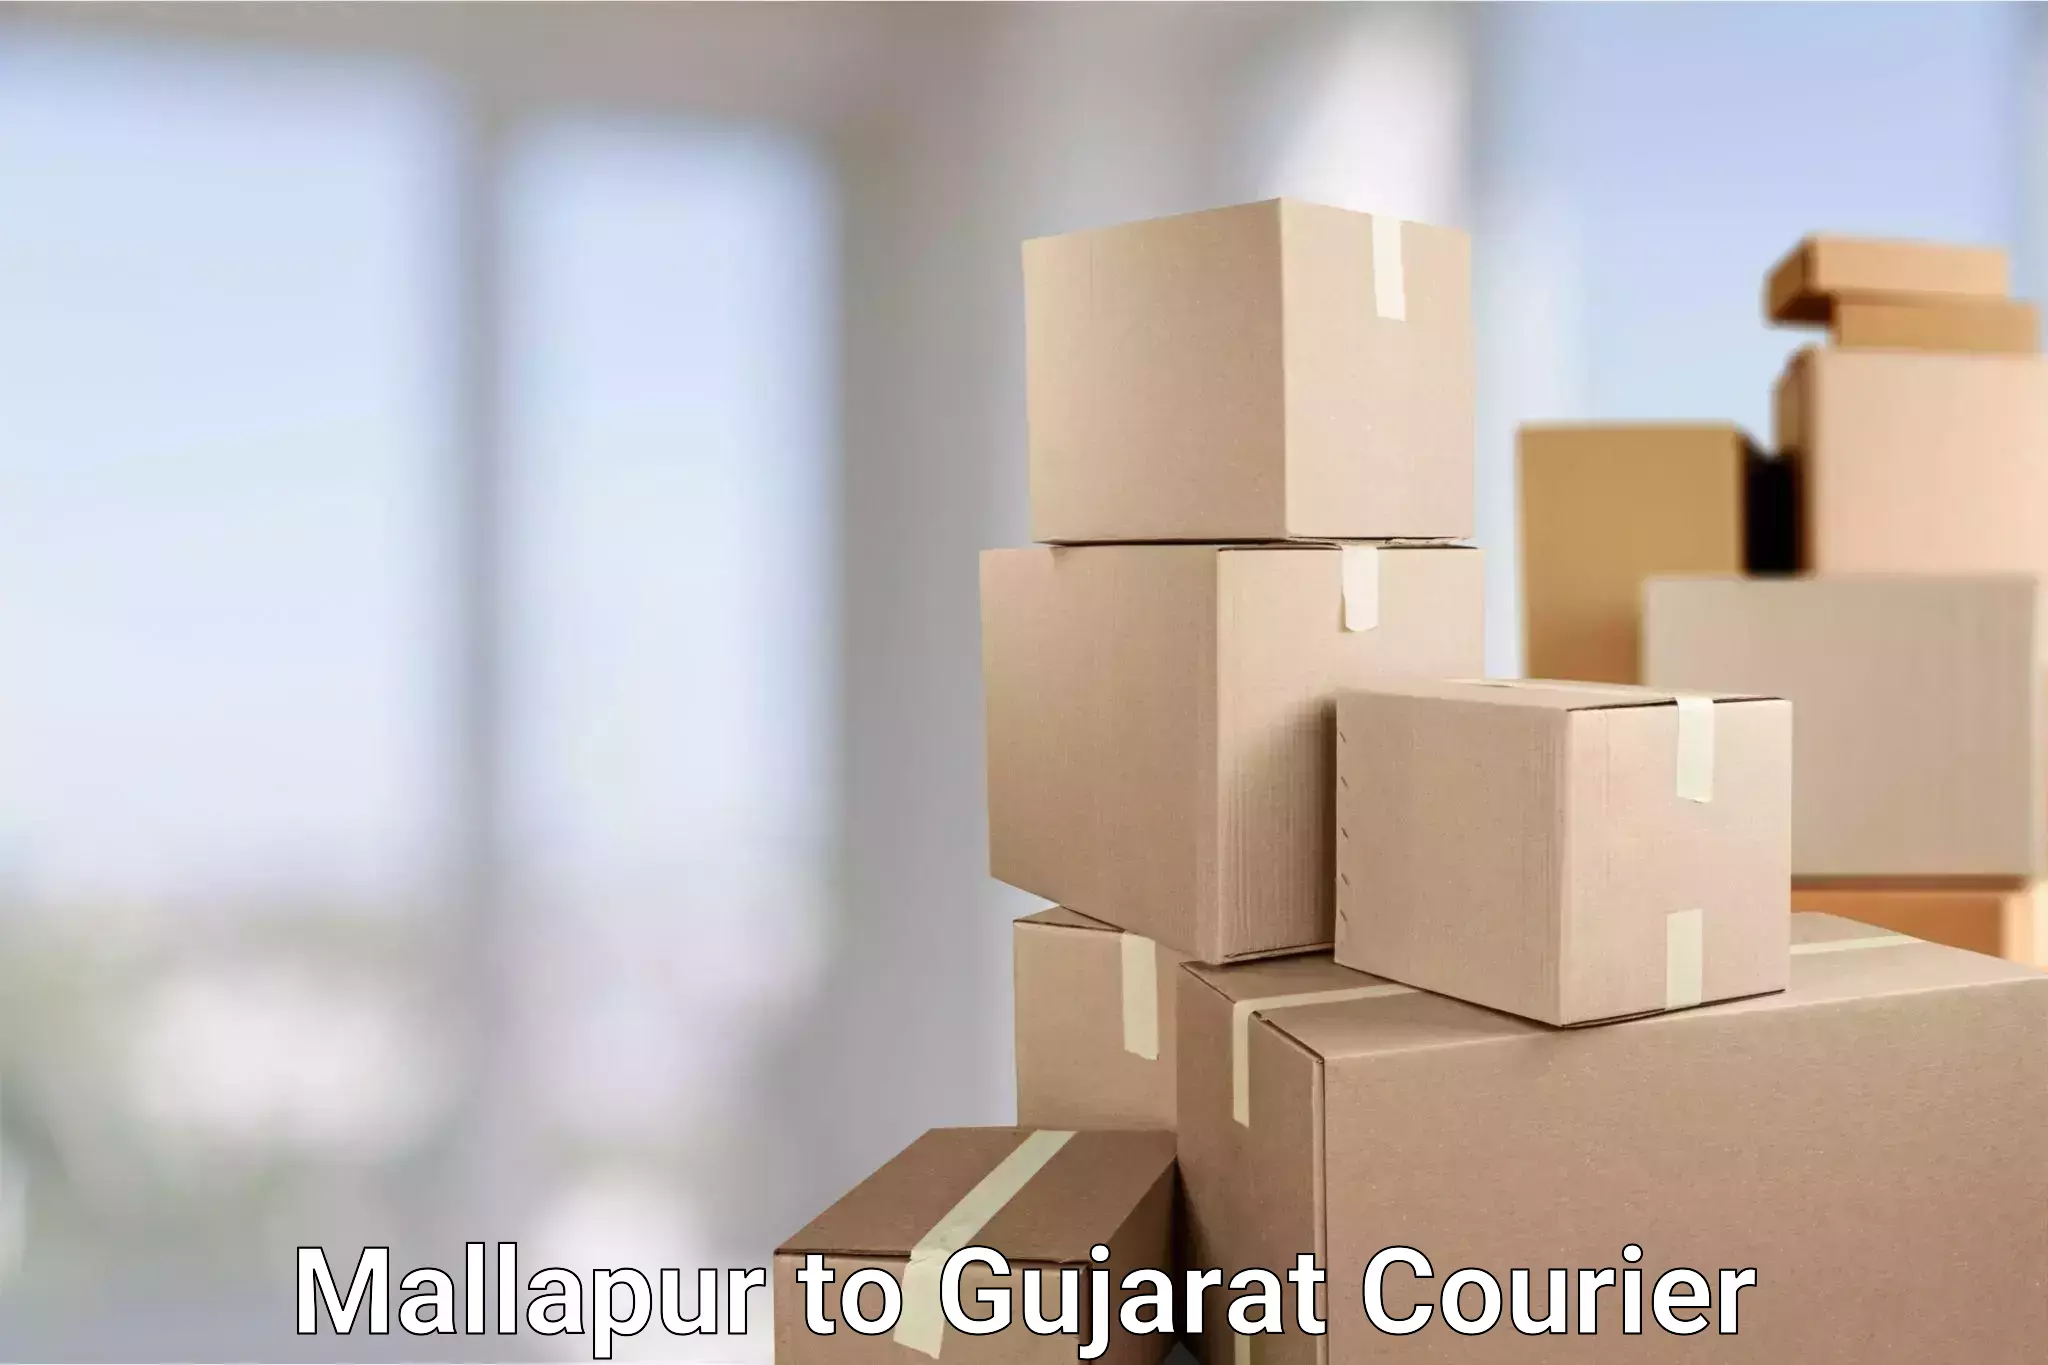 International courier networks Mallapur to Ahmedabad